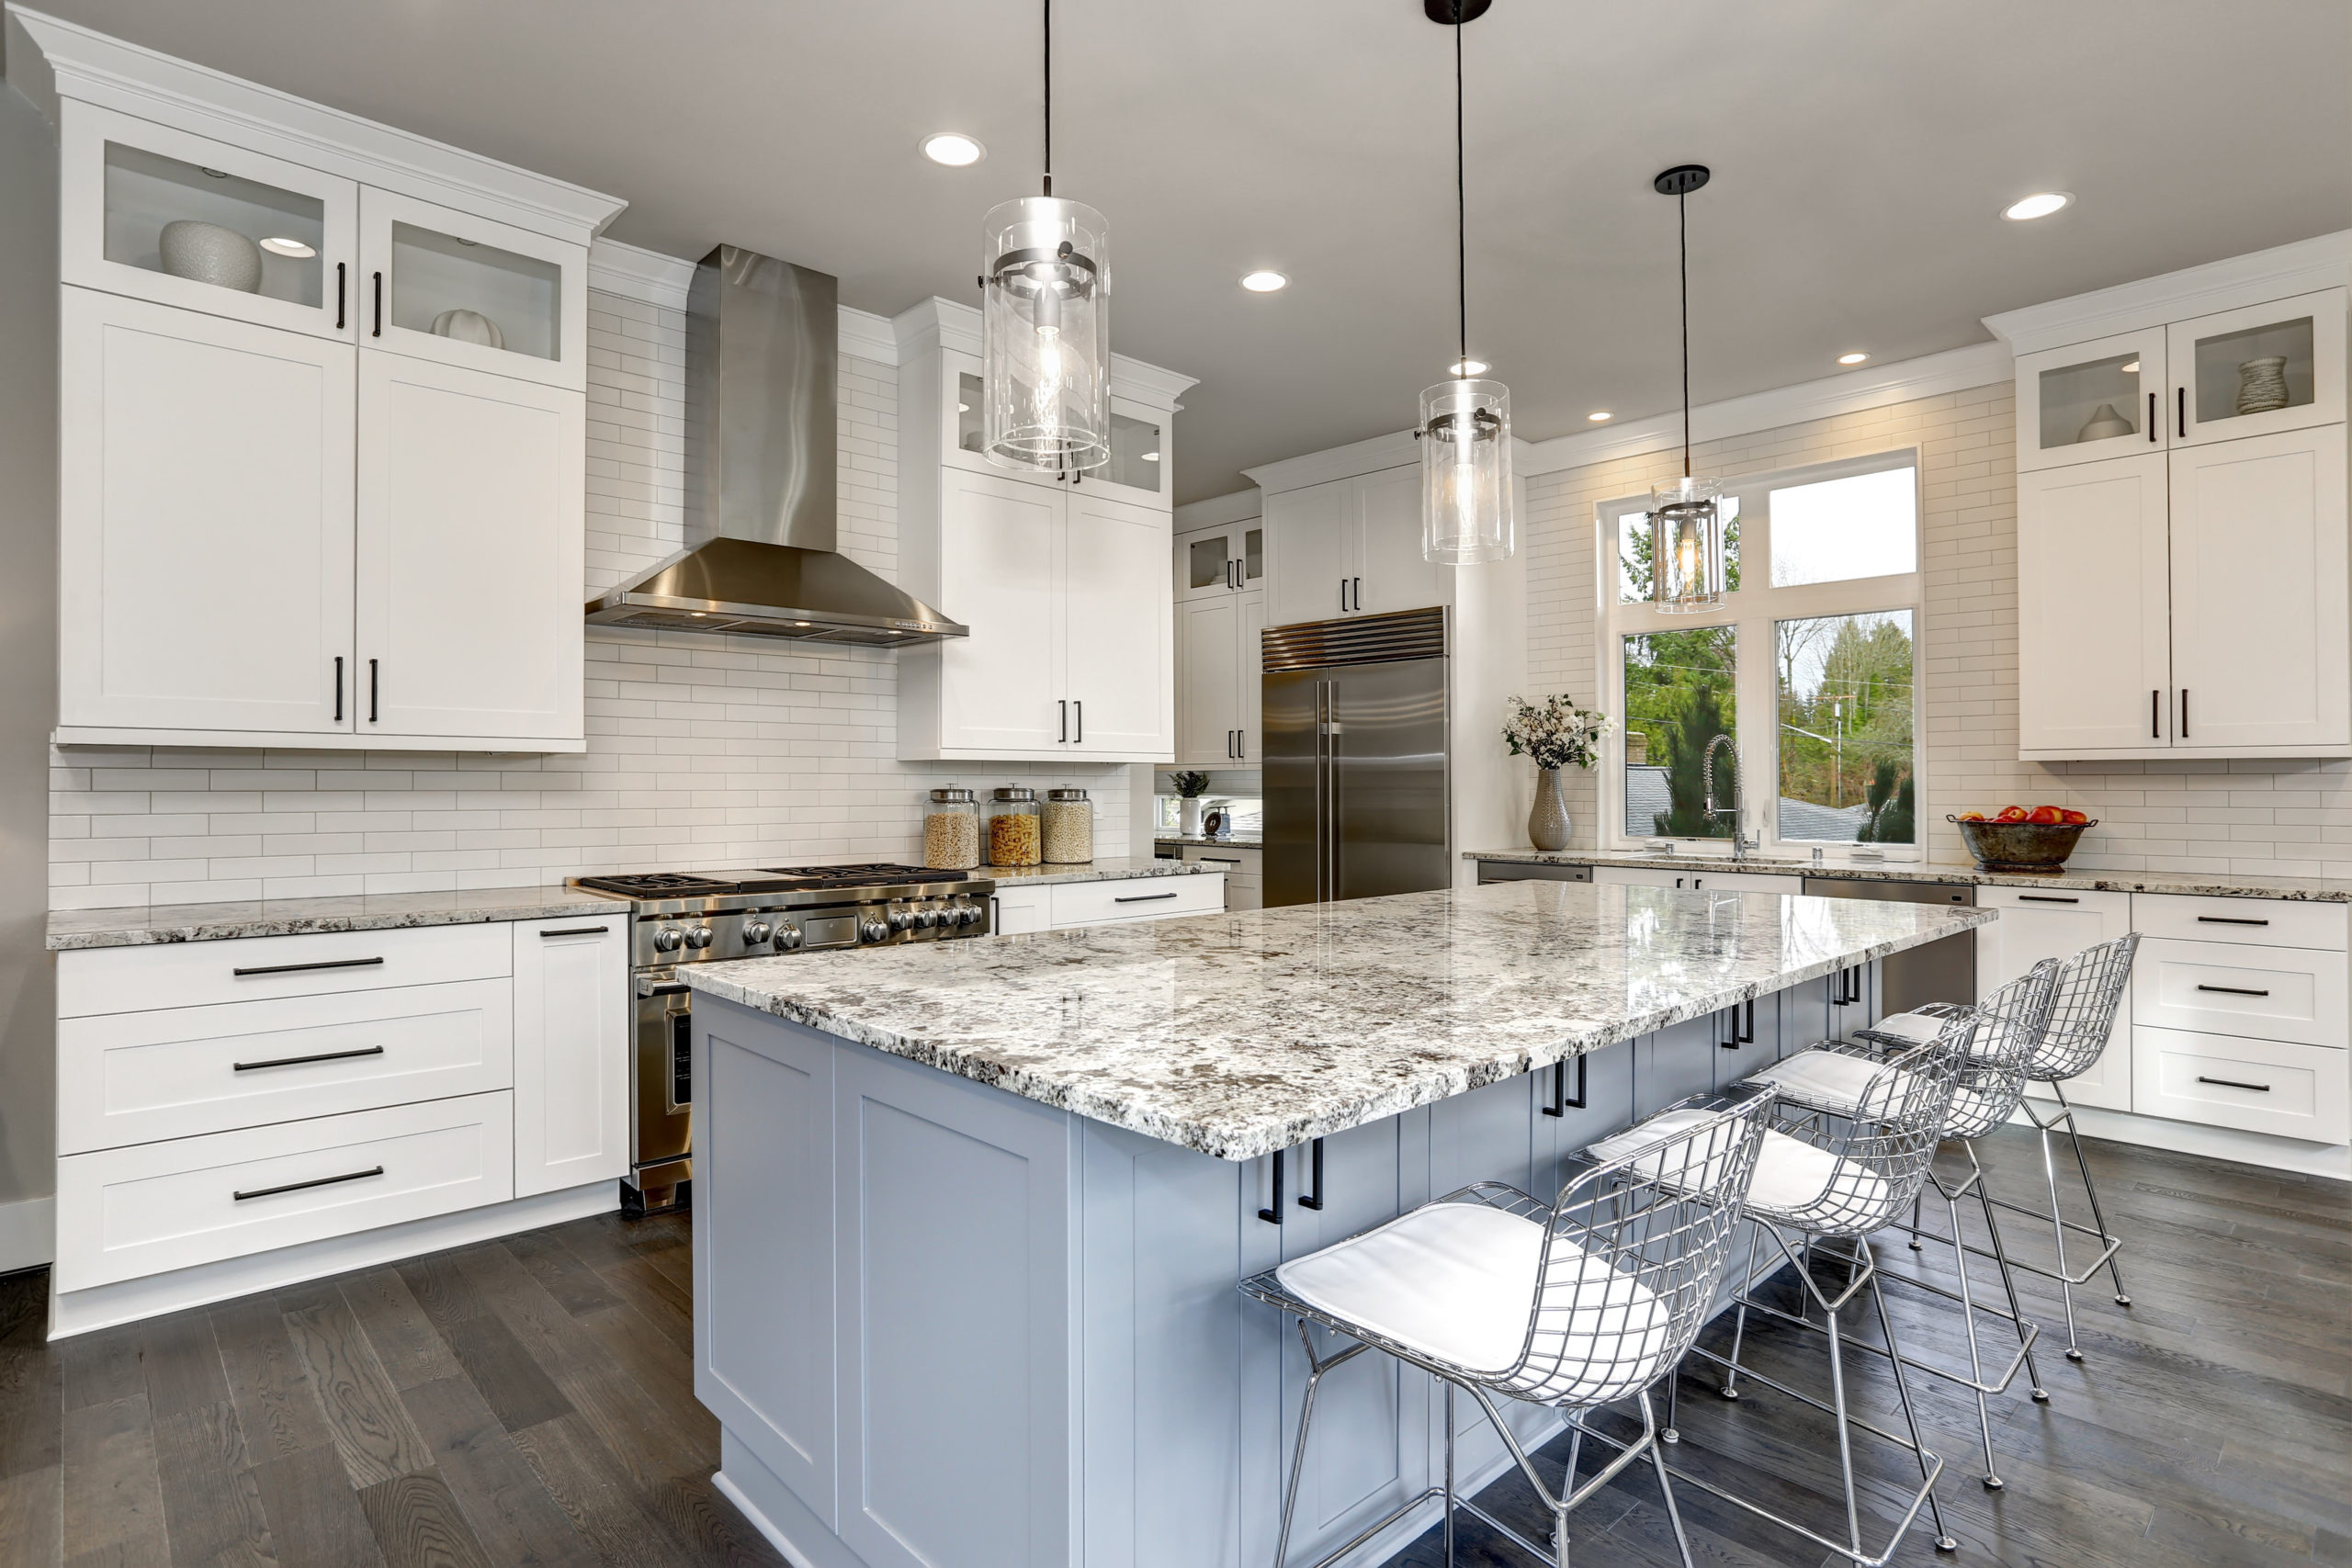 Electrical Requirements for a Kitchen in San Diego, CA